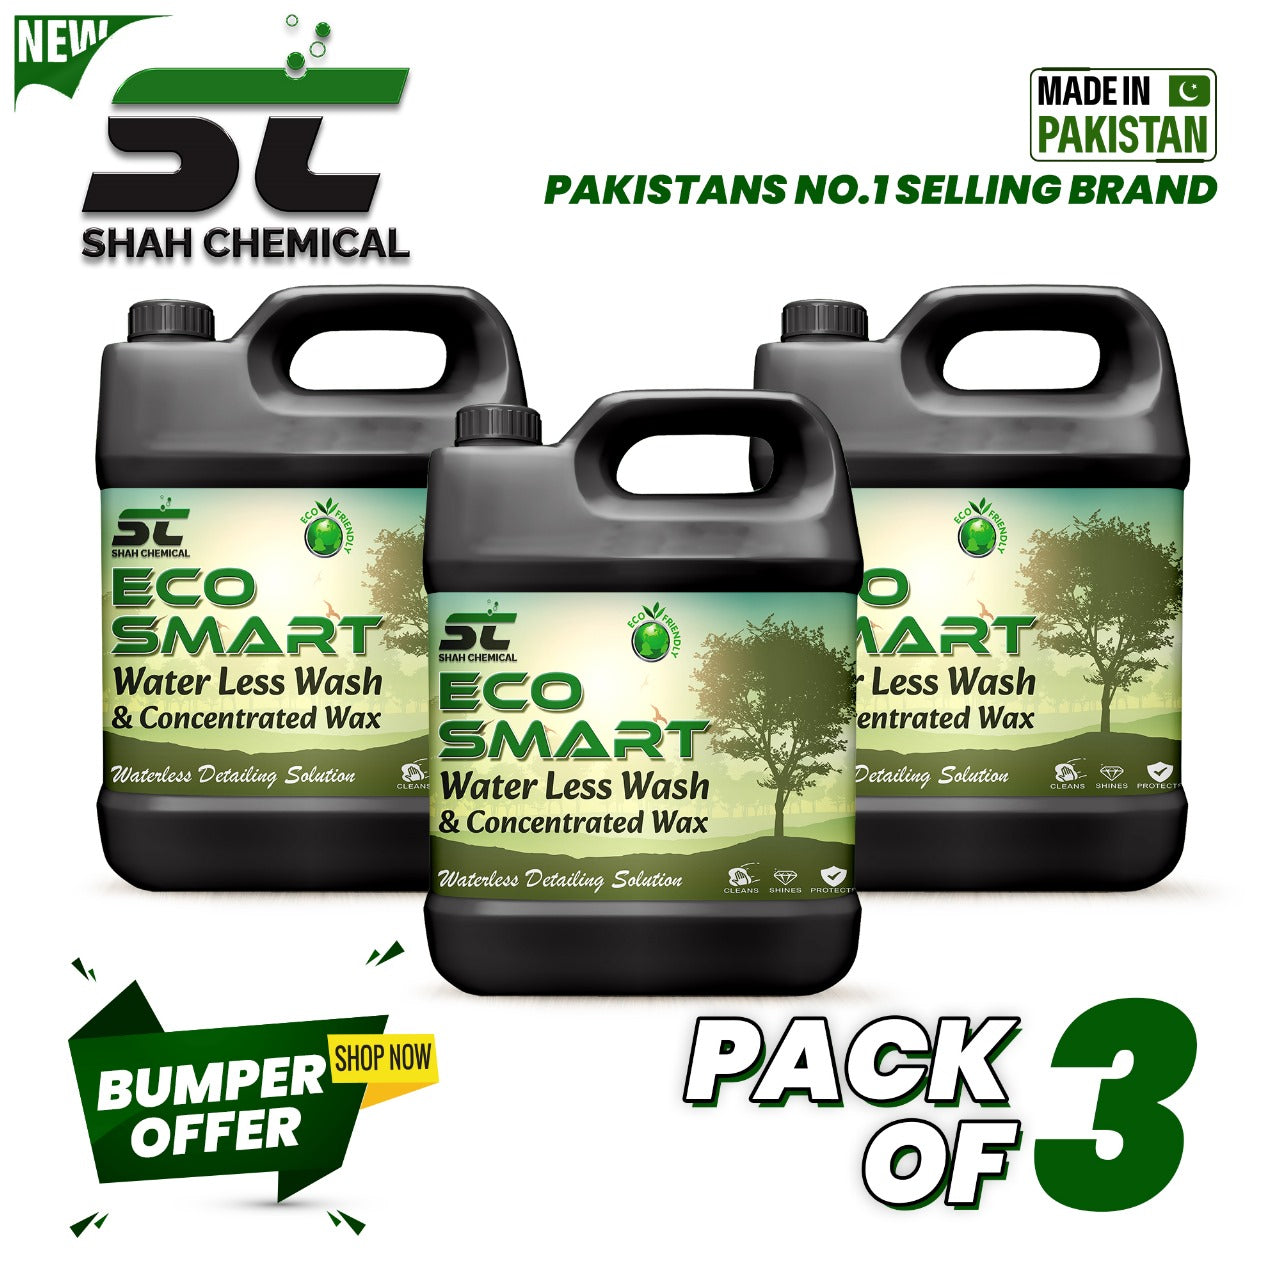 Pack of 3 Eco Smart Water Less wash & wax - 4 litre